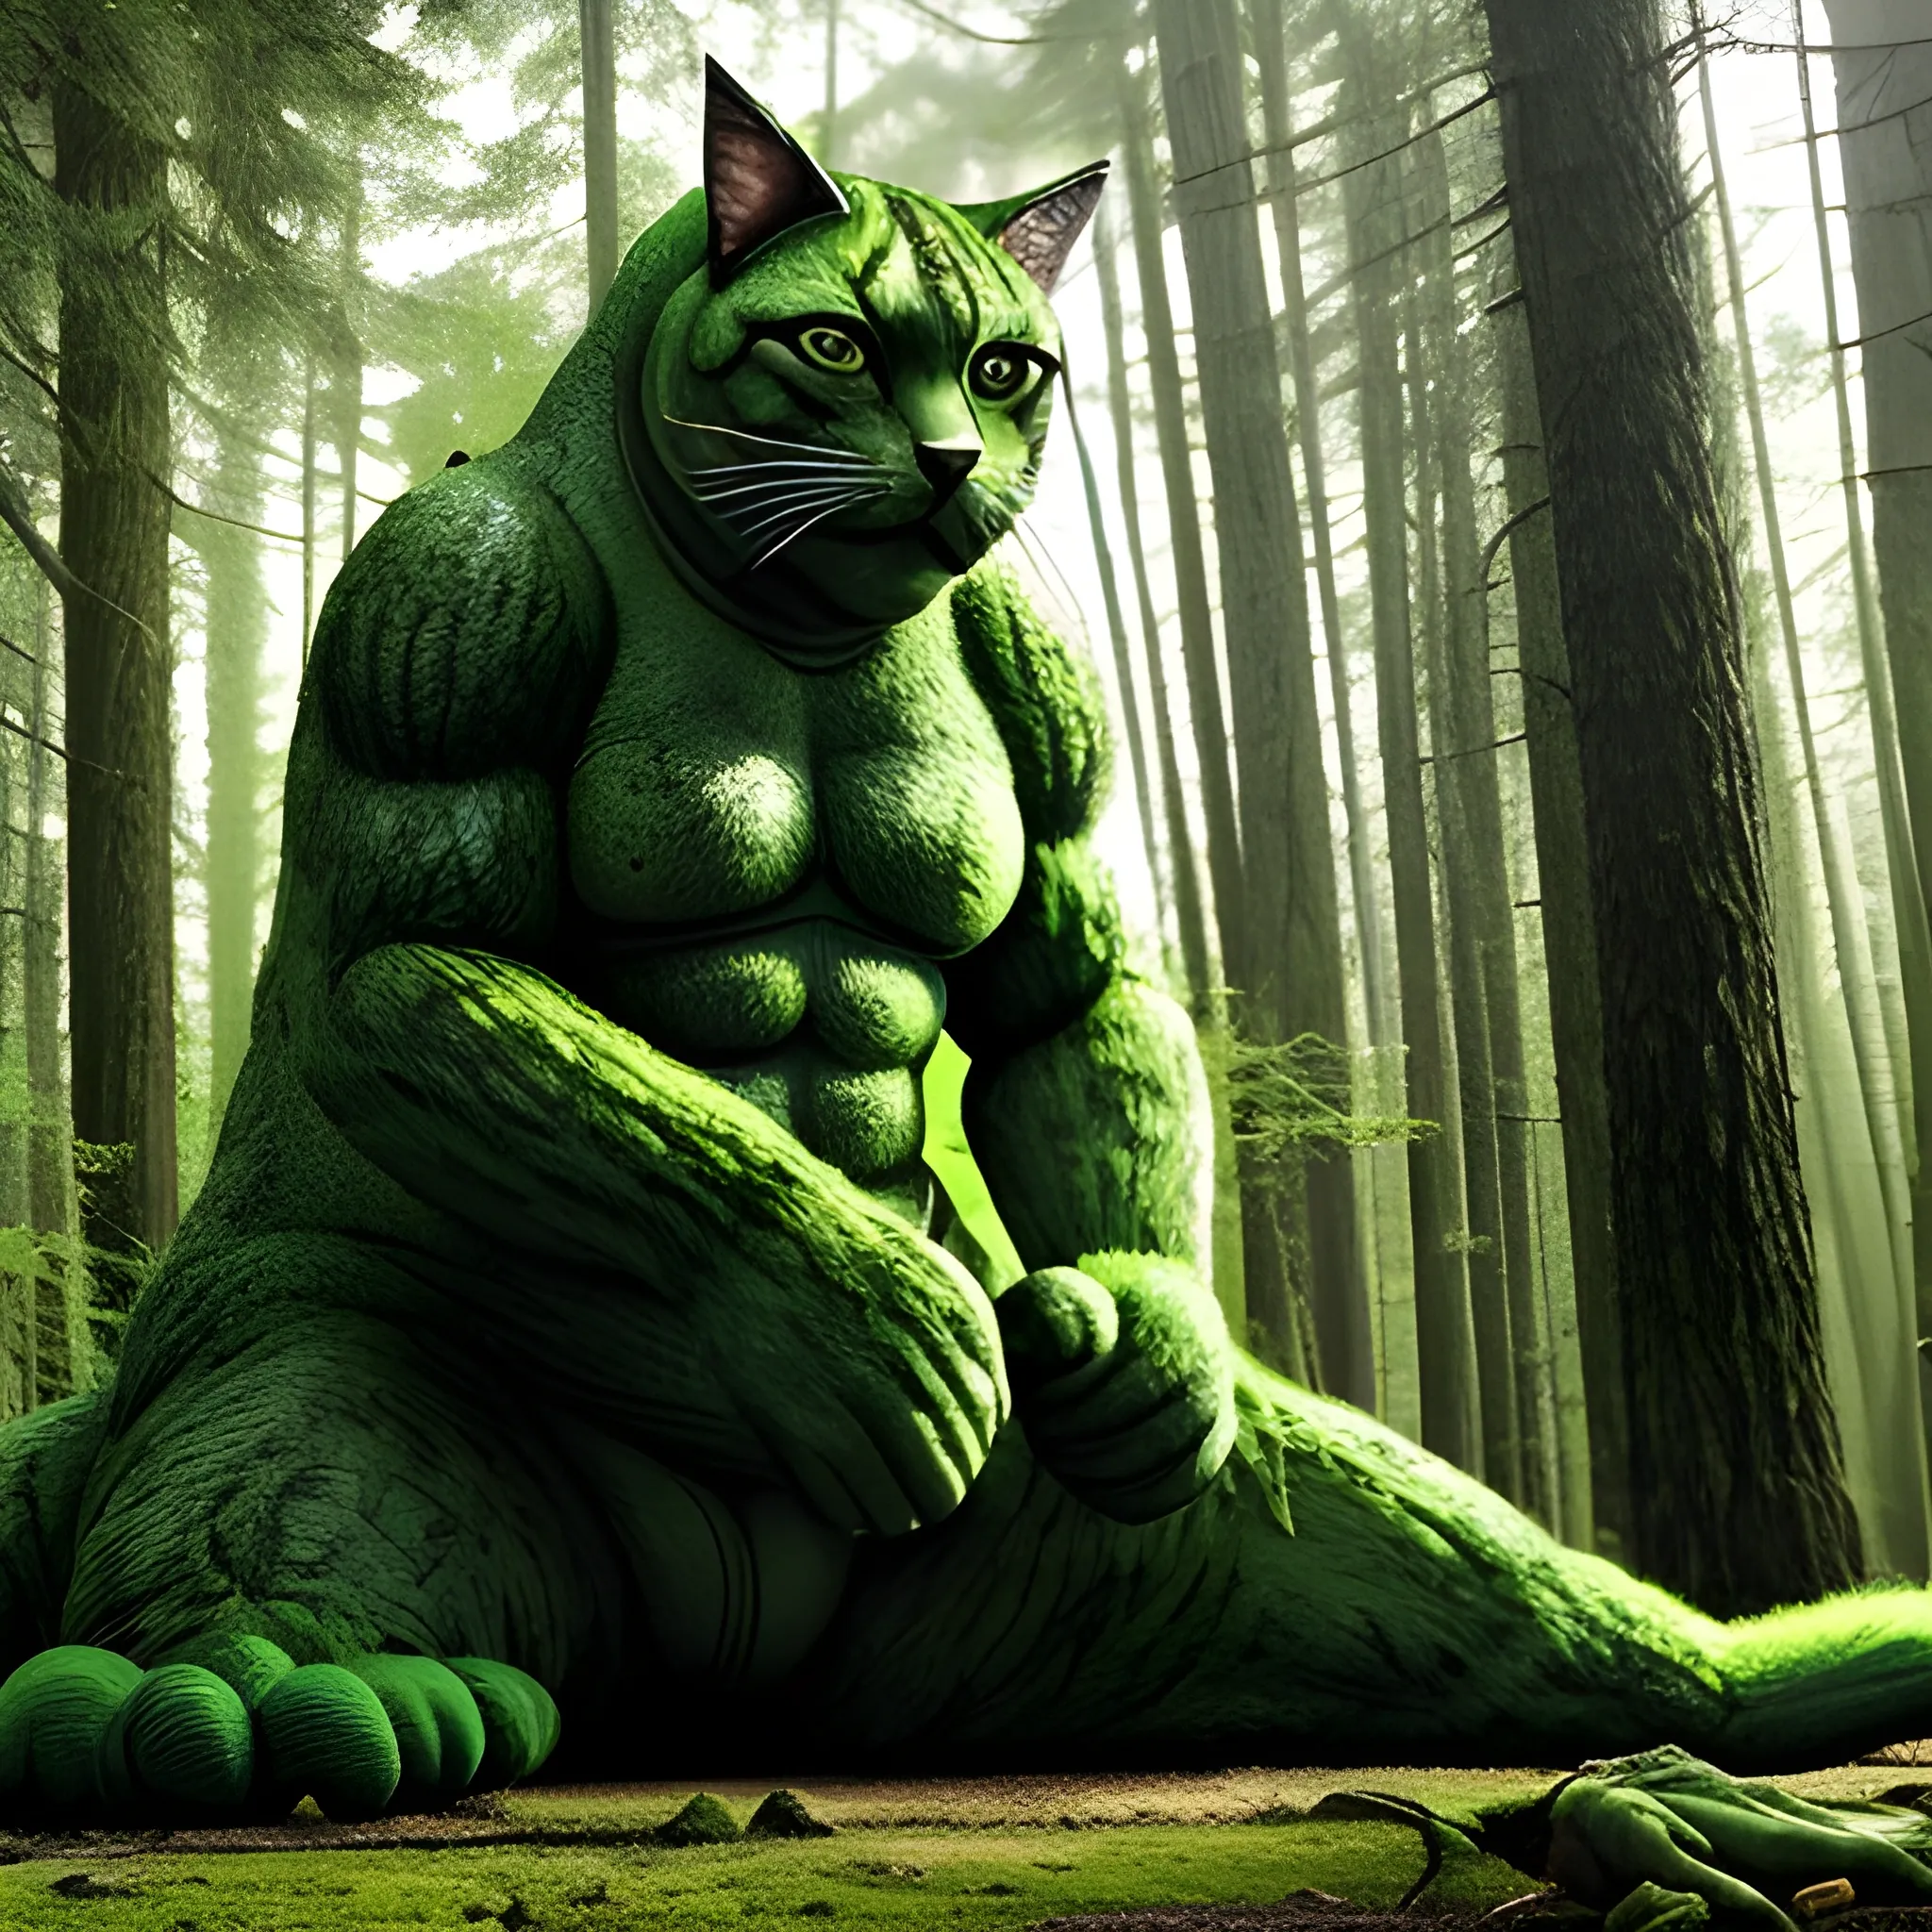 In the sunny forest, there is a very tall and strong "green cat" with very developed muscles. Godzilla is standing and lying on the ground with wounds all over his body. Surreal photos and ultra-real details.